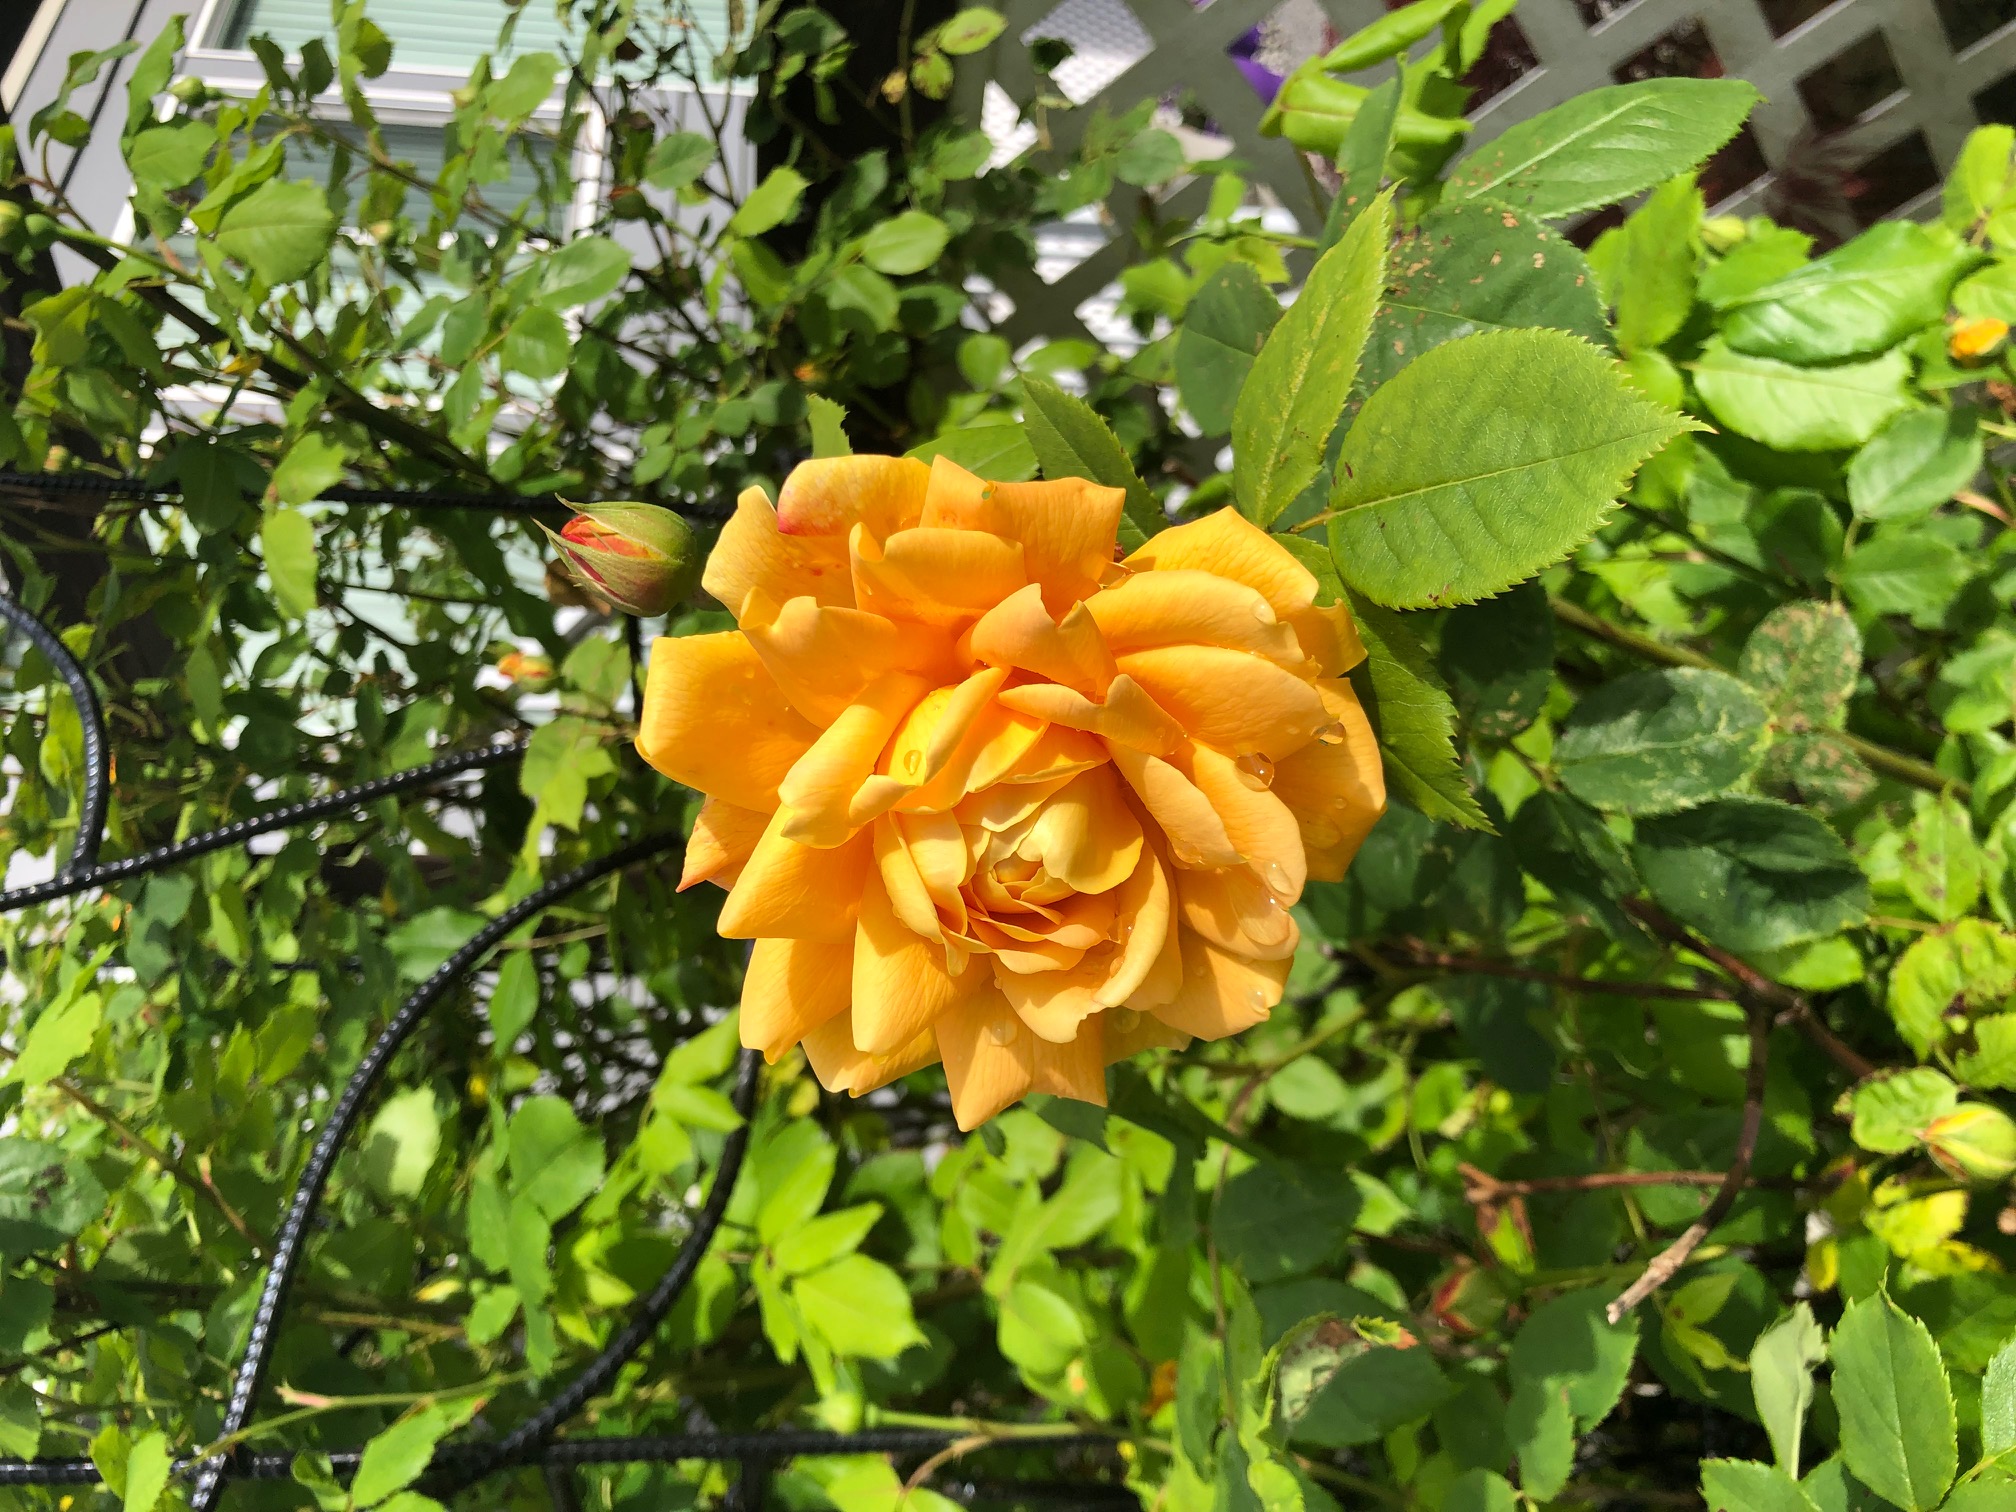 From Brad in Langley, on June 8, 2022: His first 'garden' rose to bloom was Golden Celebration.